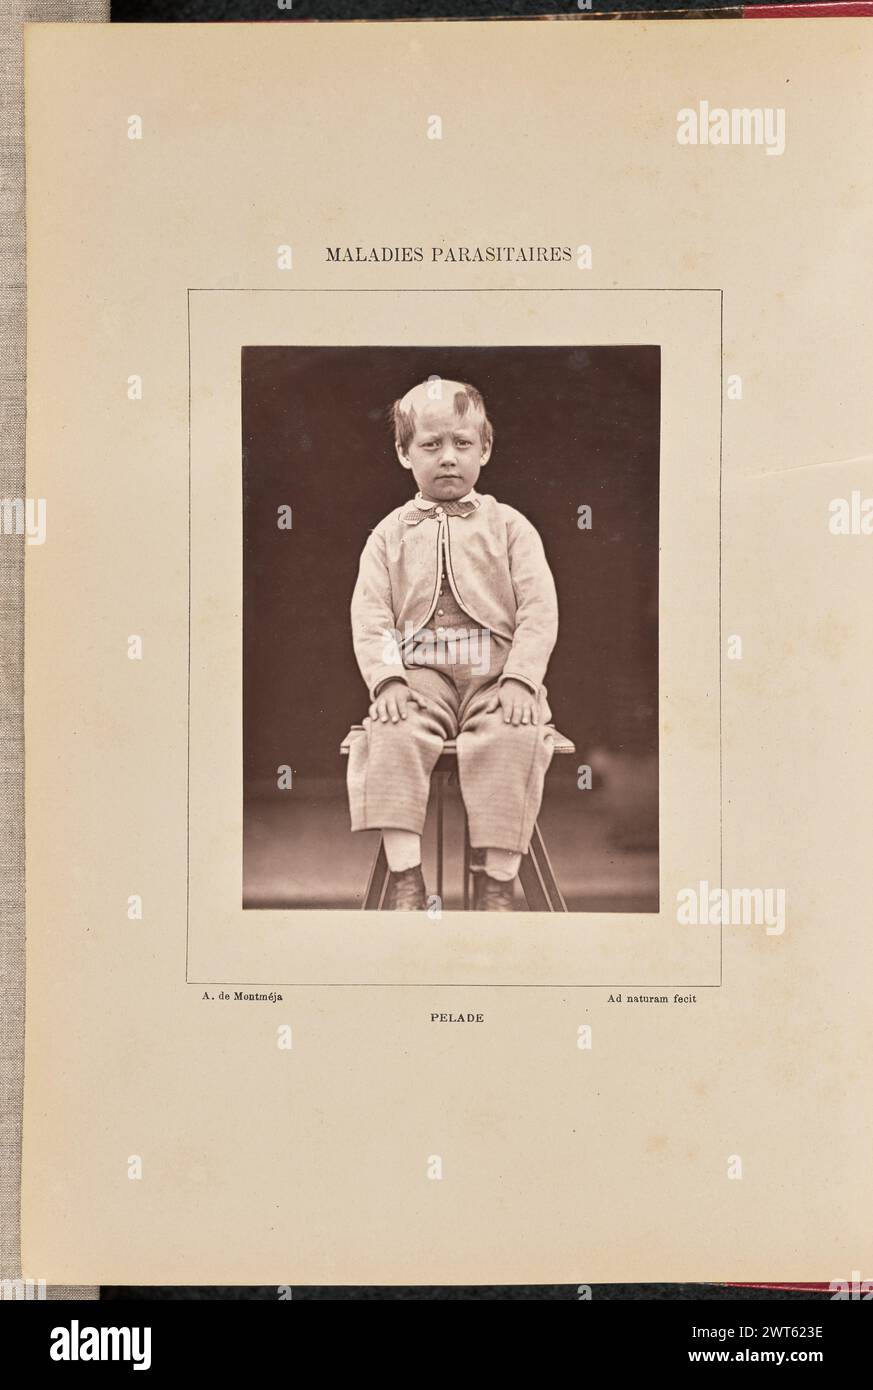 Pelade. Arthur de Montmeja, photographer (French, born 1841) negative about 1867, print 1882 Portrait of a young boy with alopecia areata sitting on a stool with his hands resting on his knees. (Recto, mount) upper center, printed in black ink: 'MALADIES PARASITAIRES' Lower left, printed in black ink: 'A. de Montmeja' Lower center, printed in black ink: 'PELADE' Lower right, printed in black ink: 'Ad naturam fecit' Stock Photo